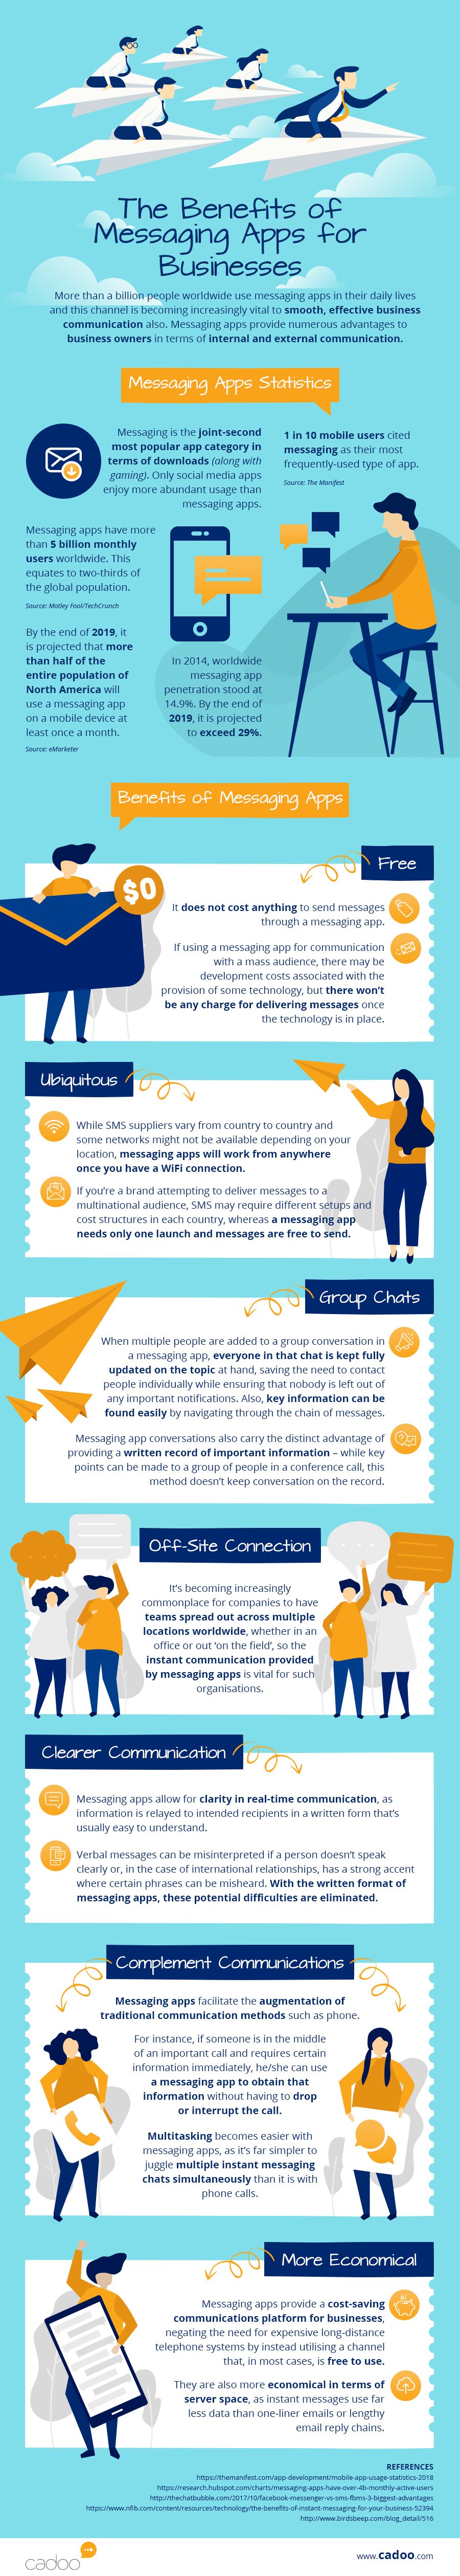 Benefits of Messaging Apps (Infographic)